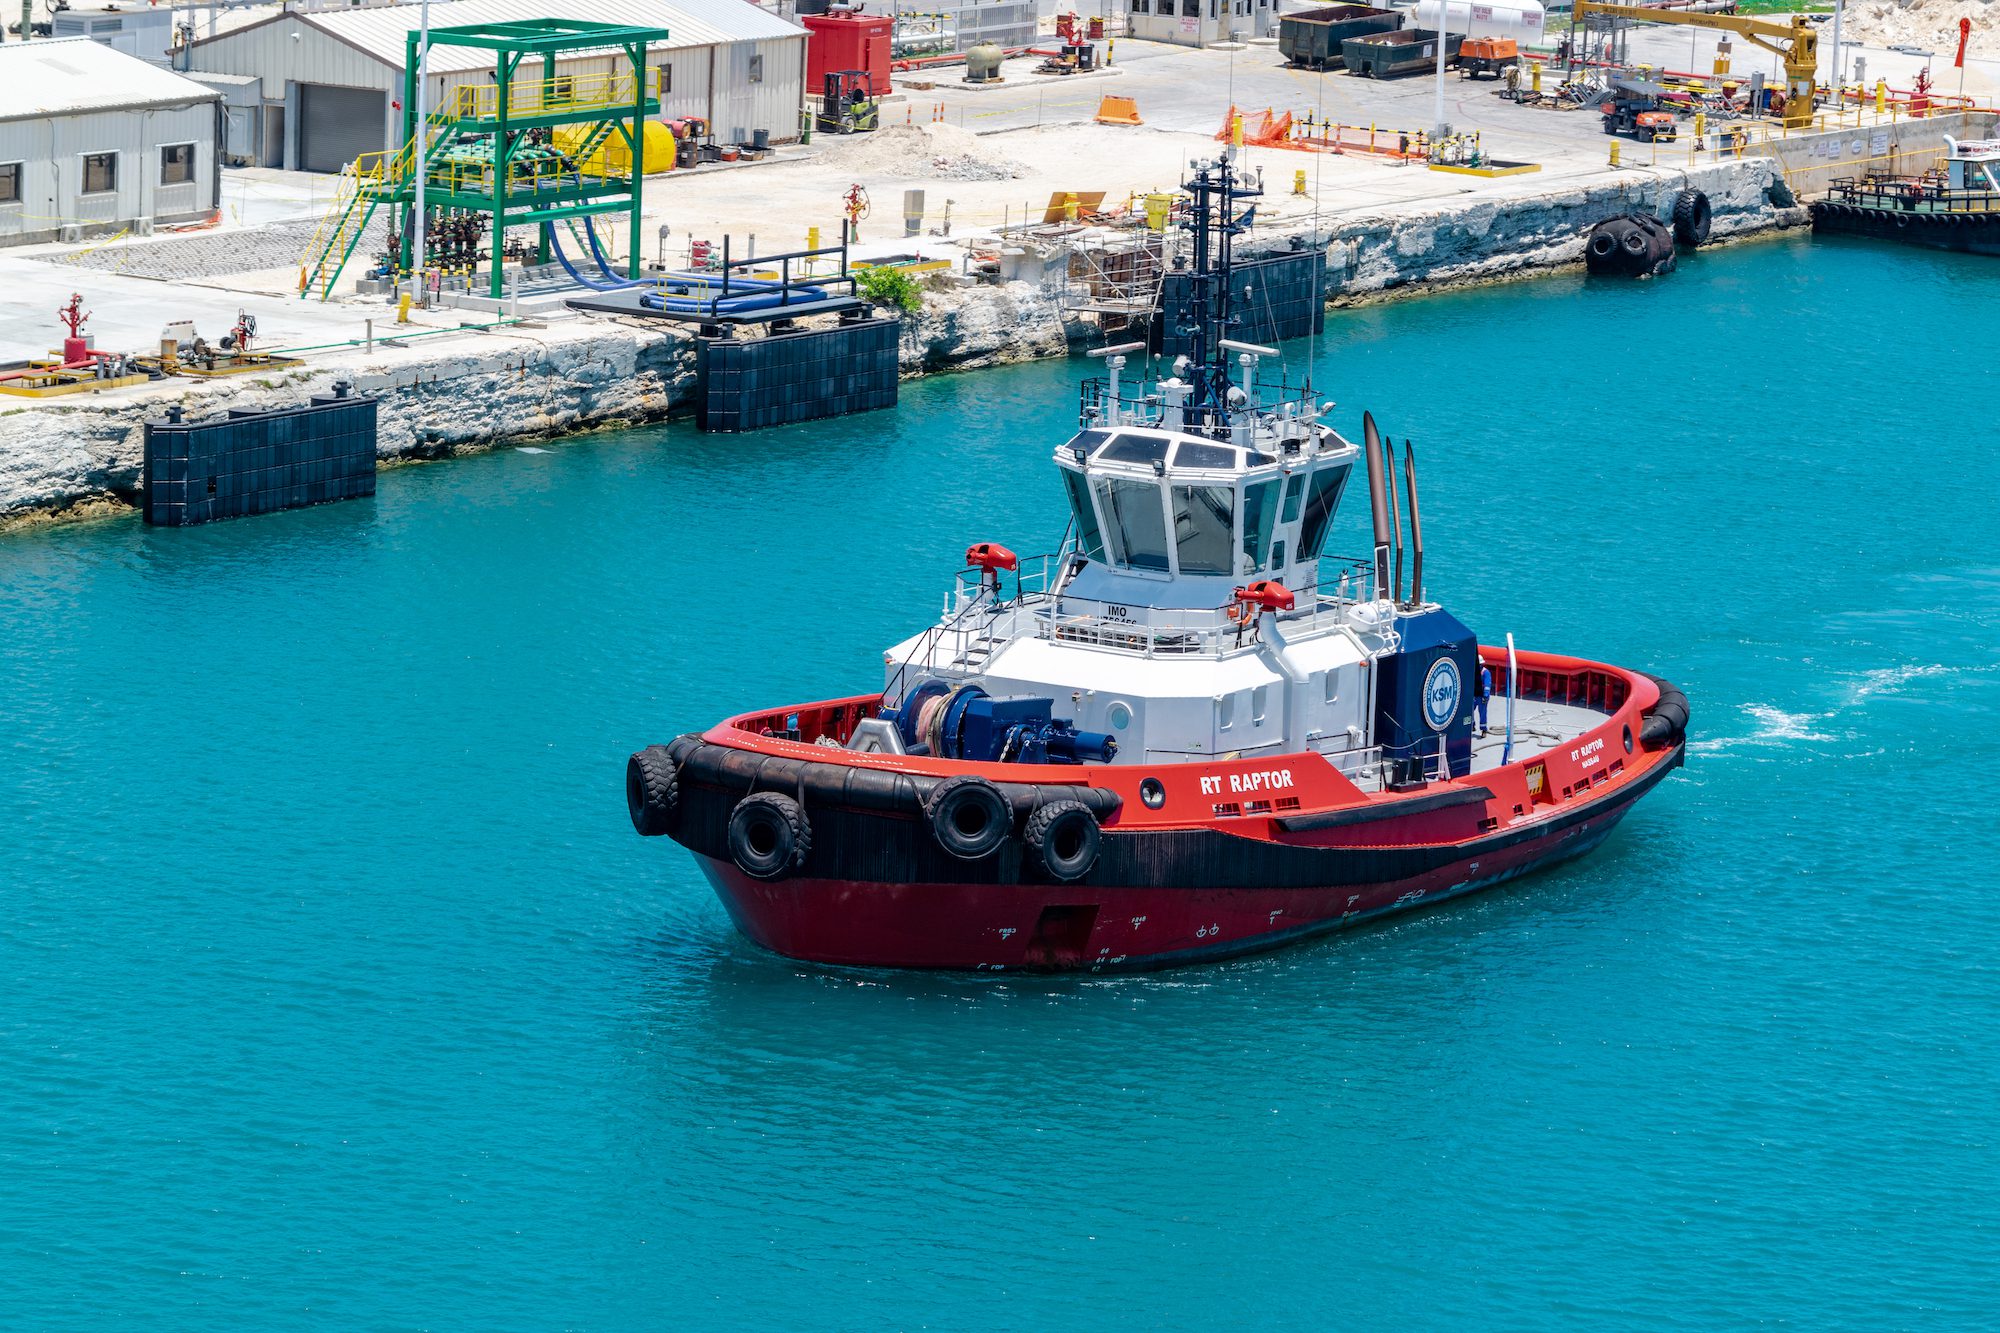 Feeport, Bahamas - May 2019: Tug boat RT Raptor near the pier close to the Freeport Container Port and Cruise Port